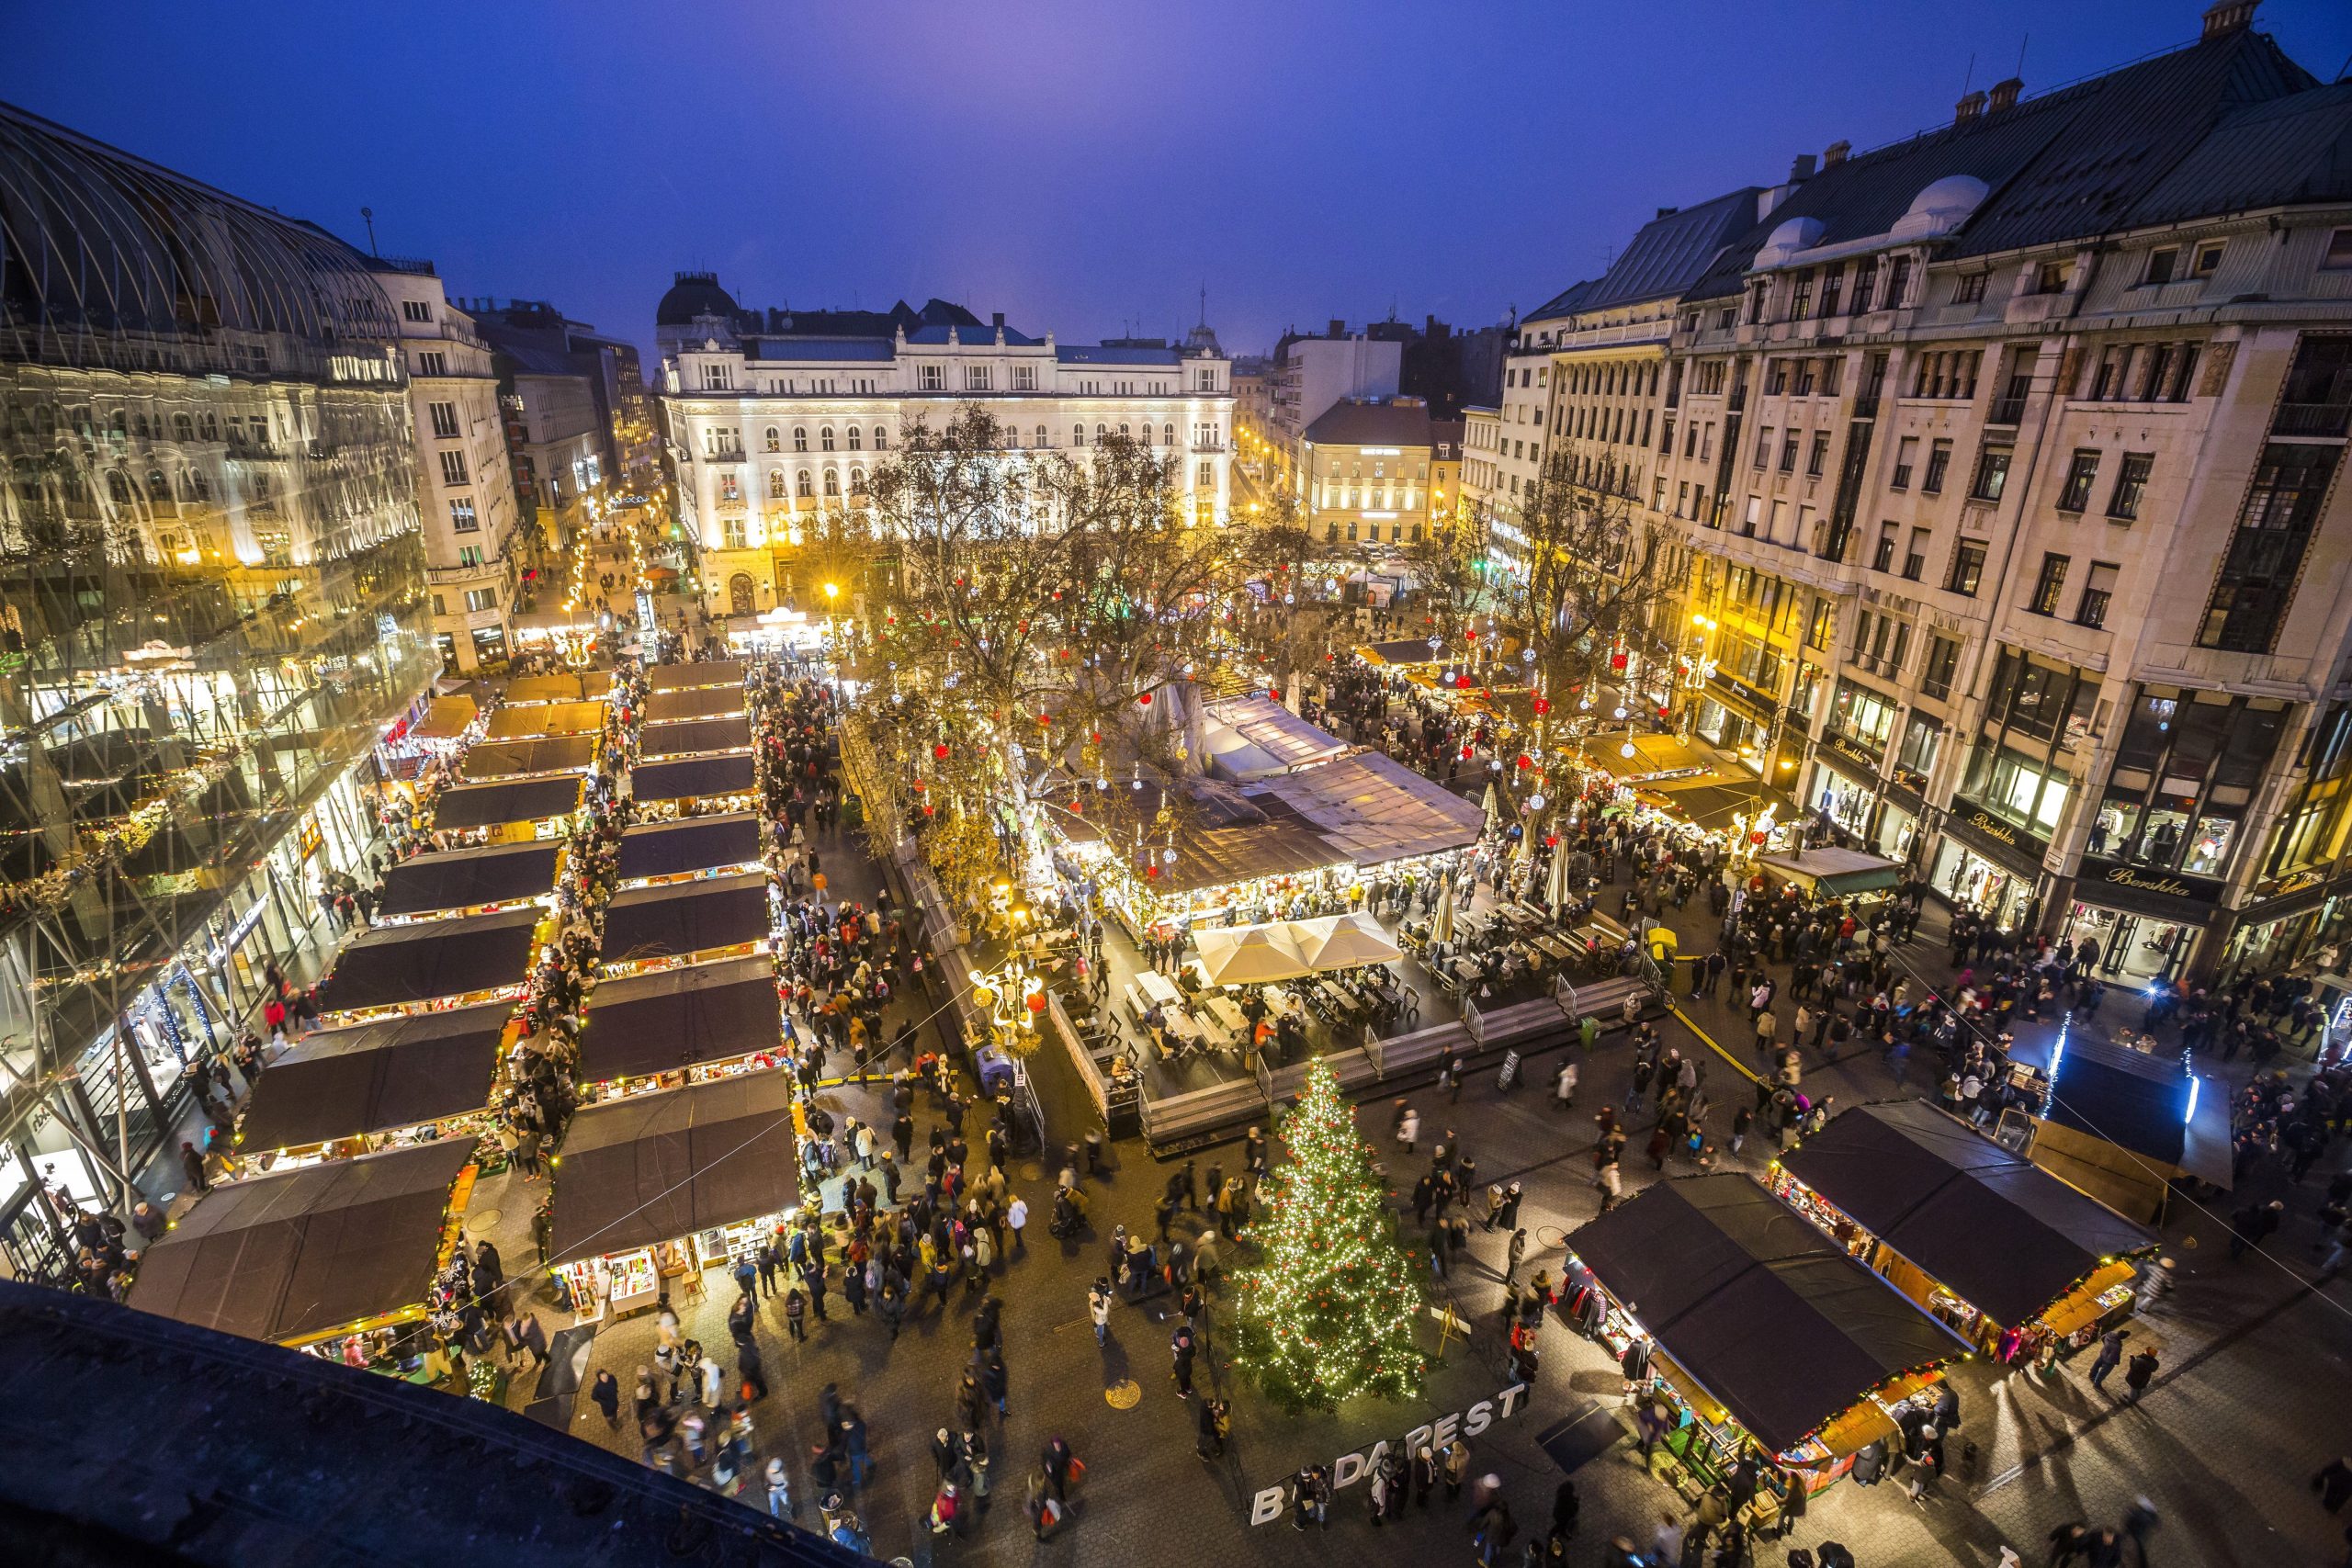 Budapest Christmas Market to be Held Again after Last Year's Hiatus